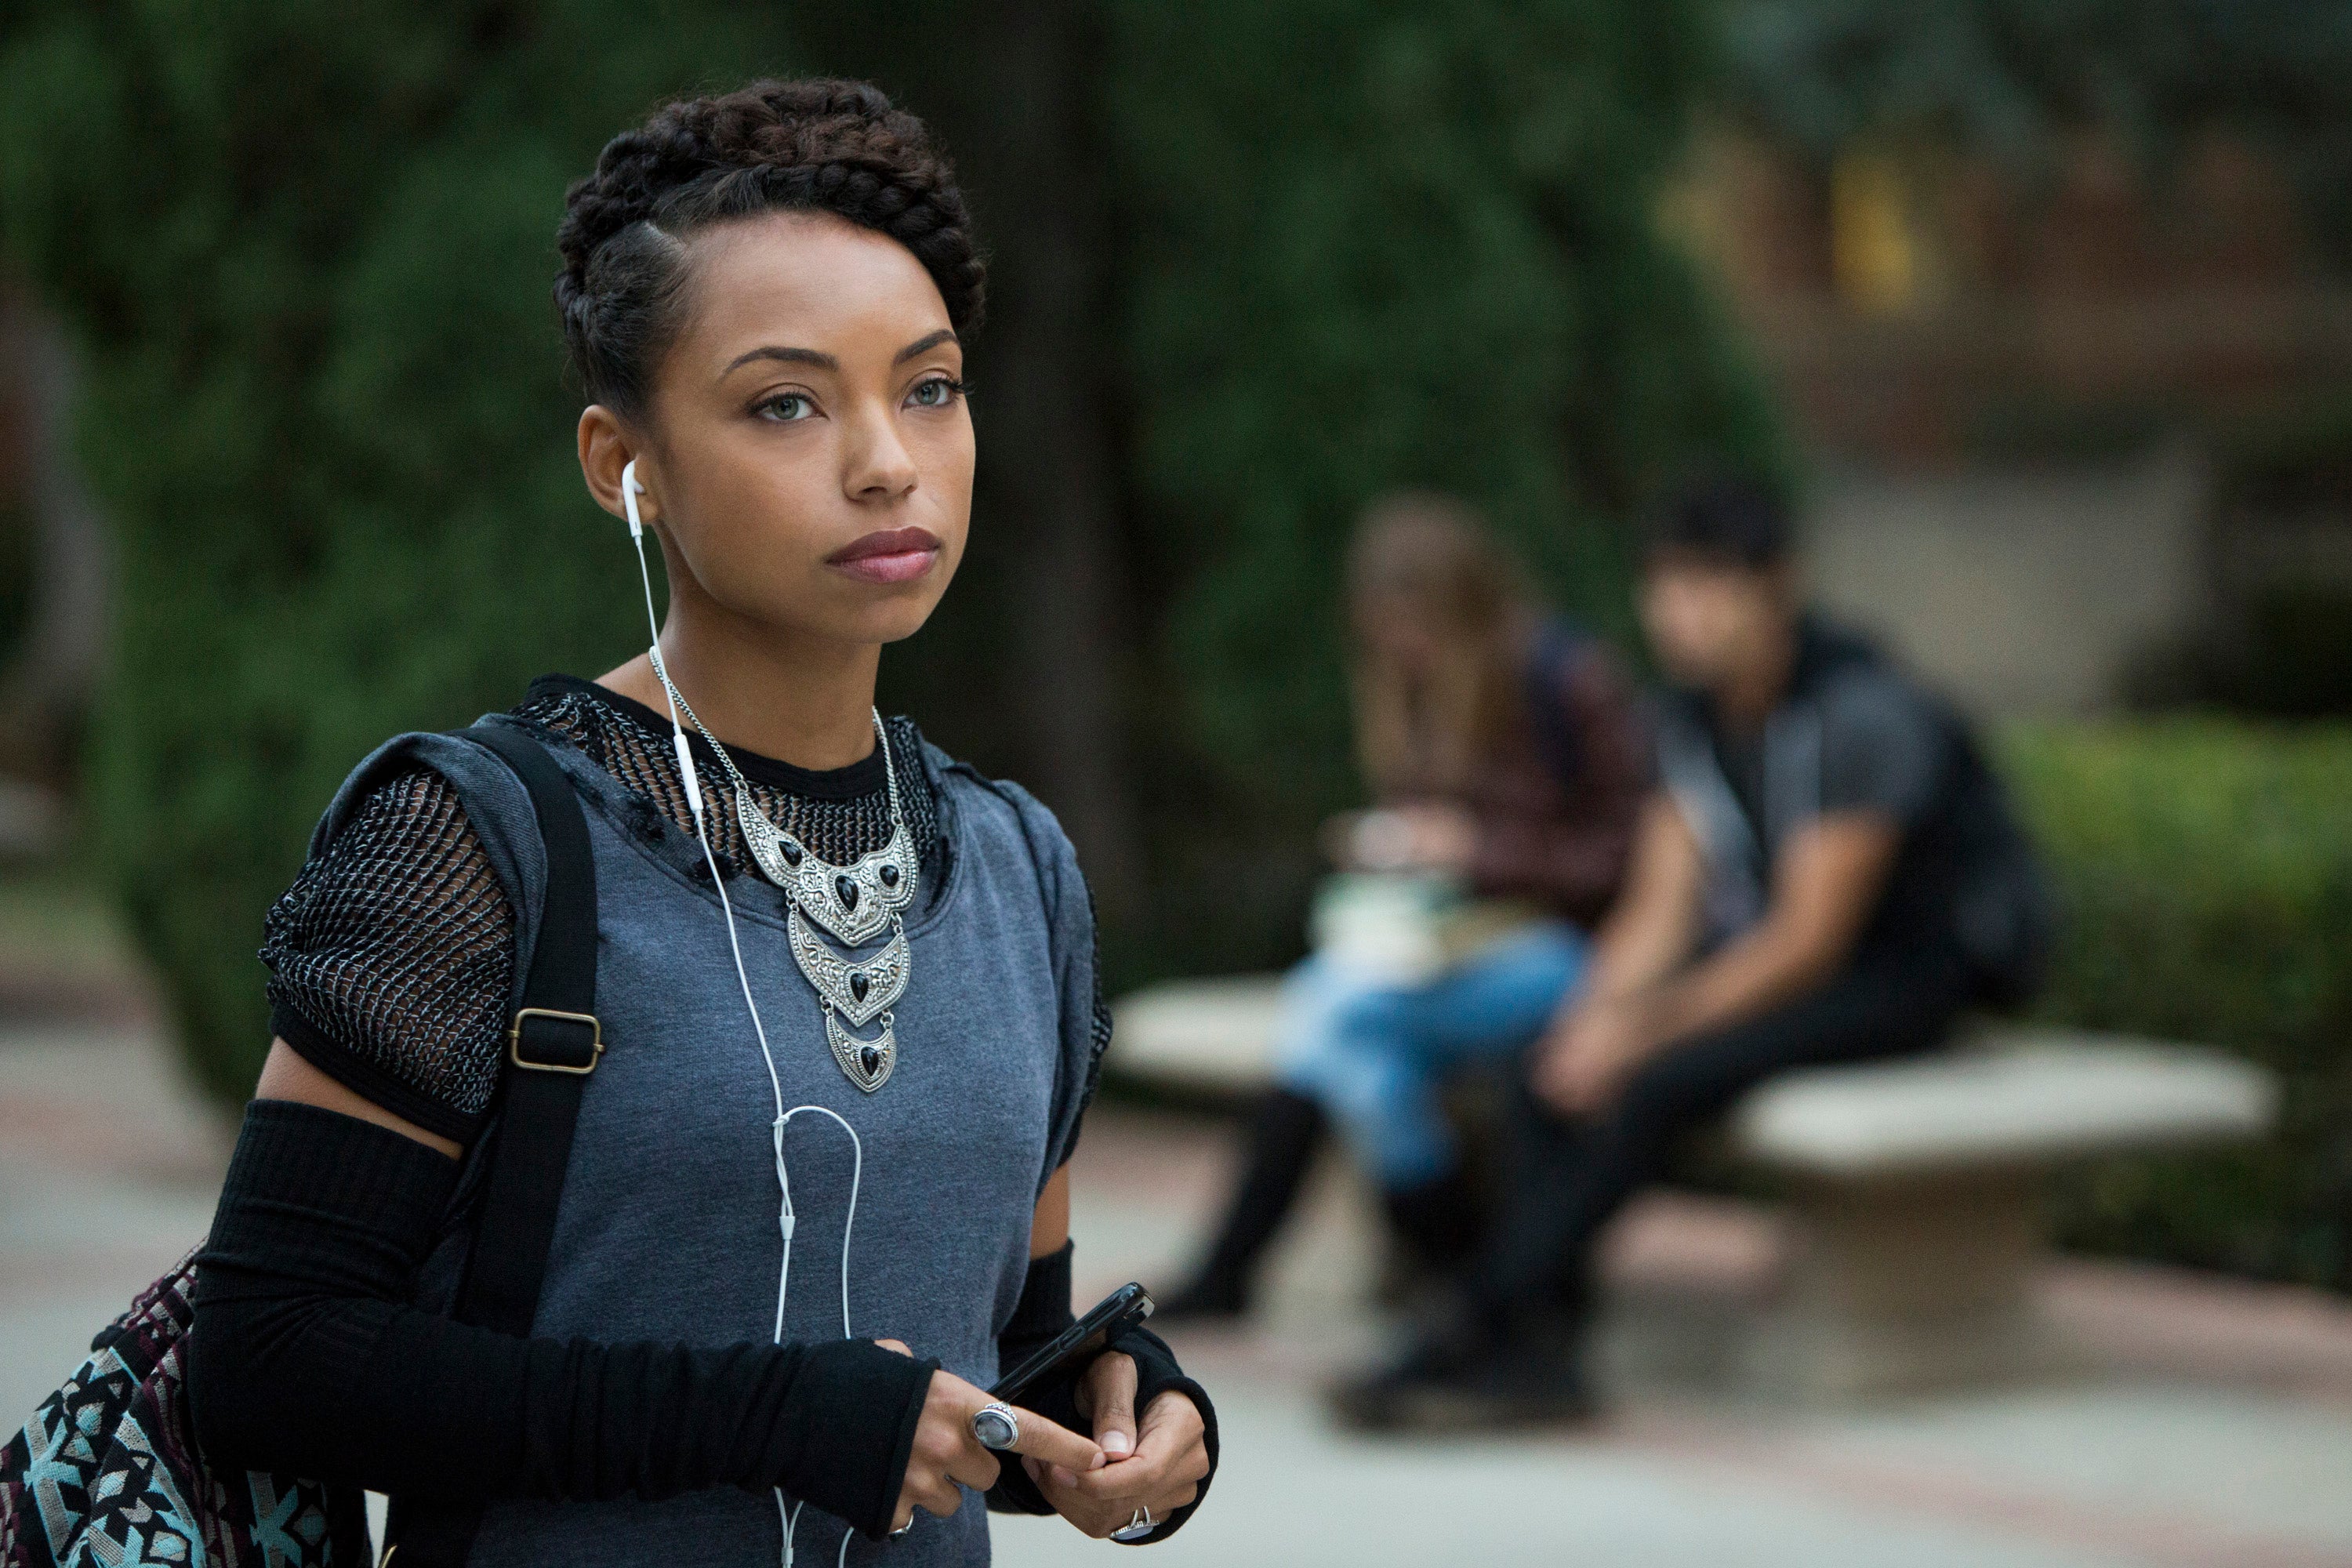 ‘Dear White People’s’ Justin Simien and Logan Browning Address White Critics